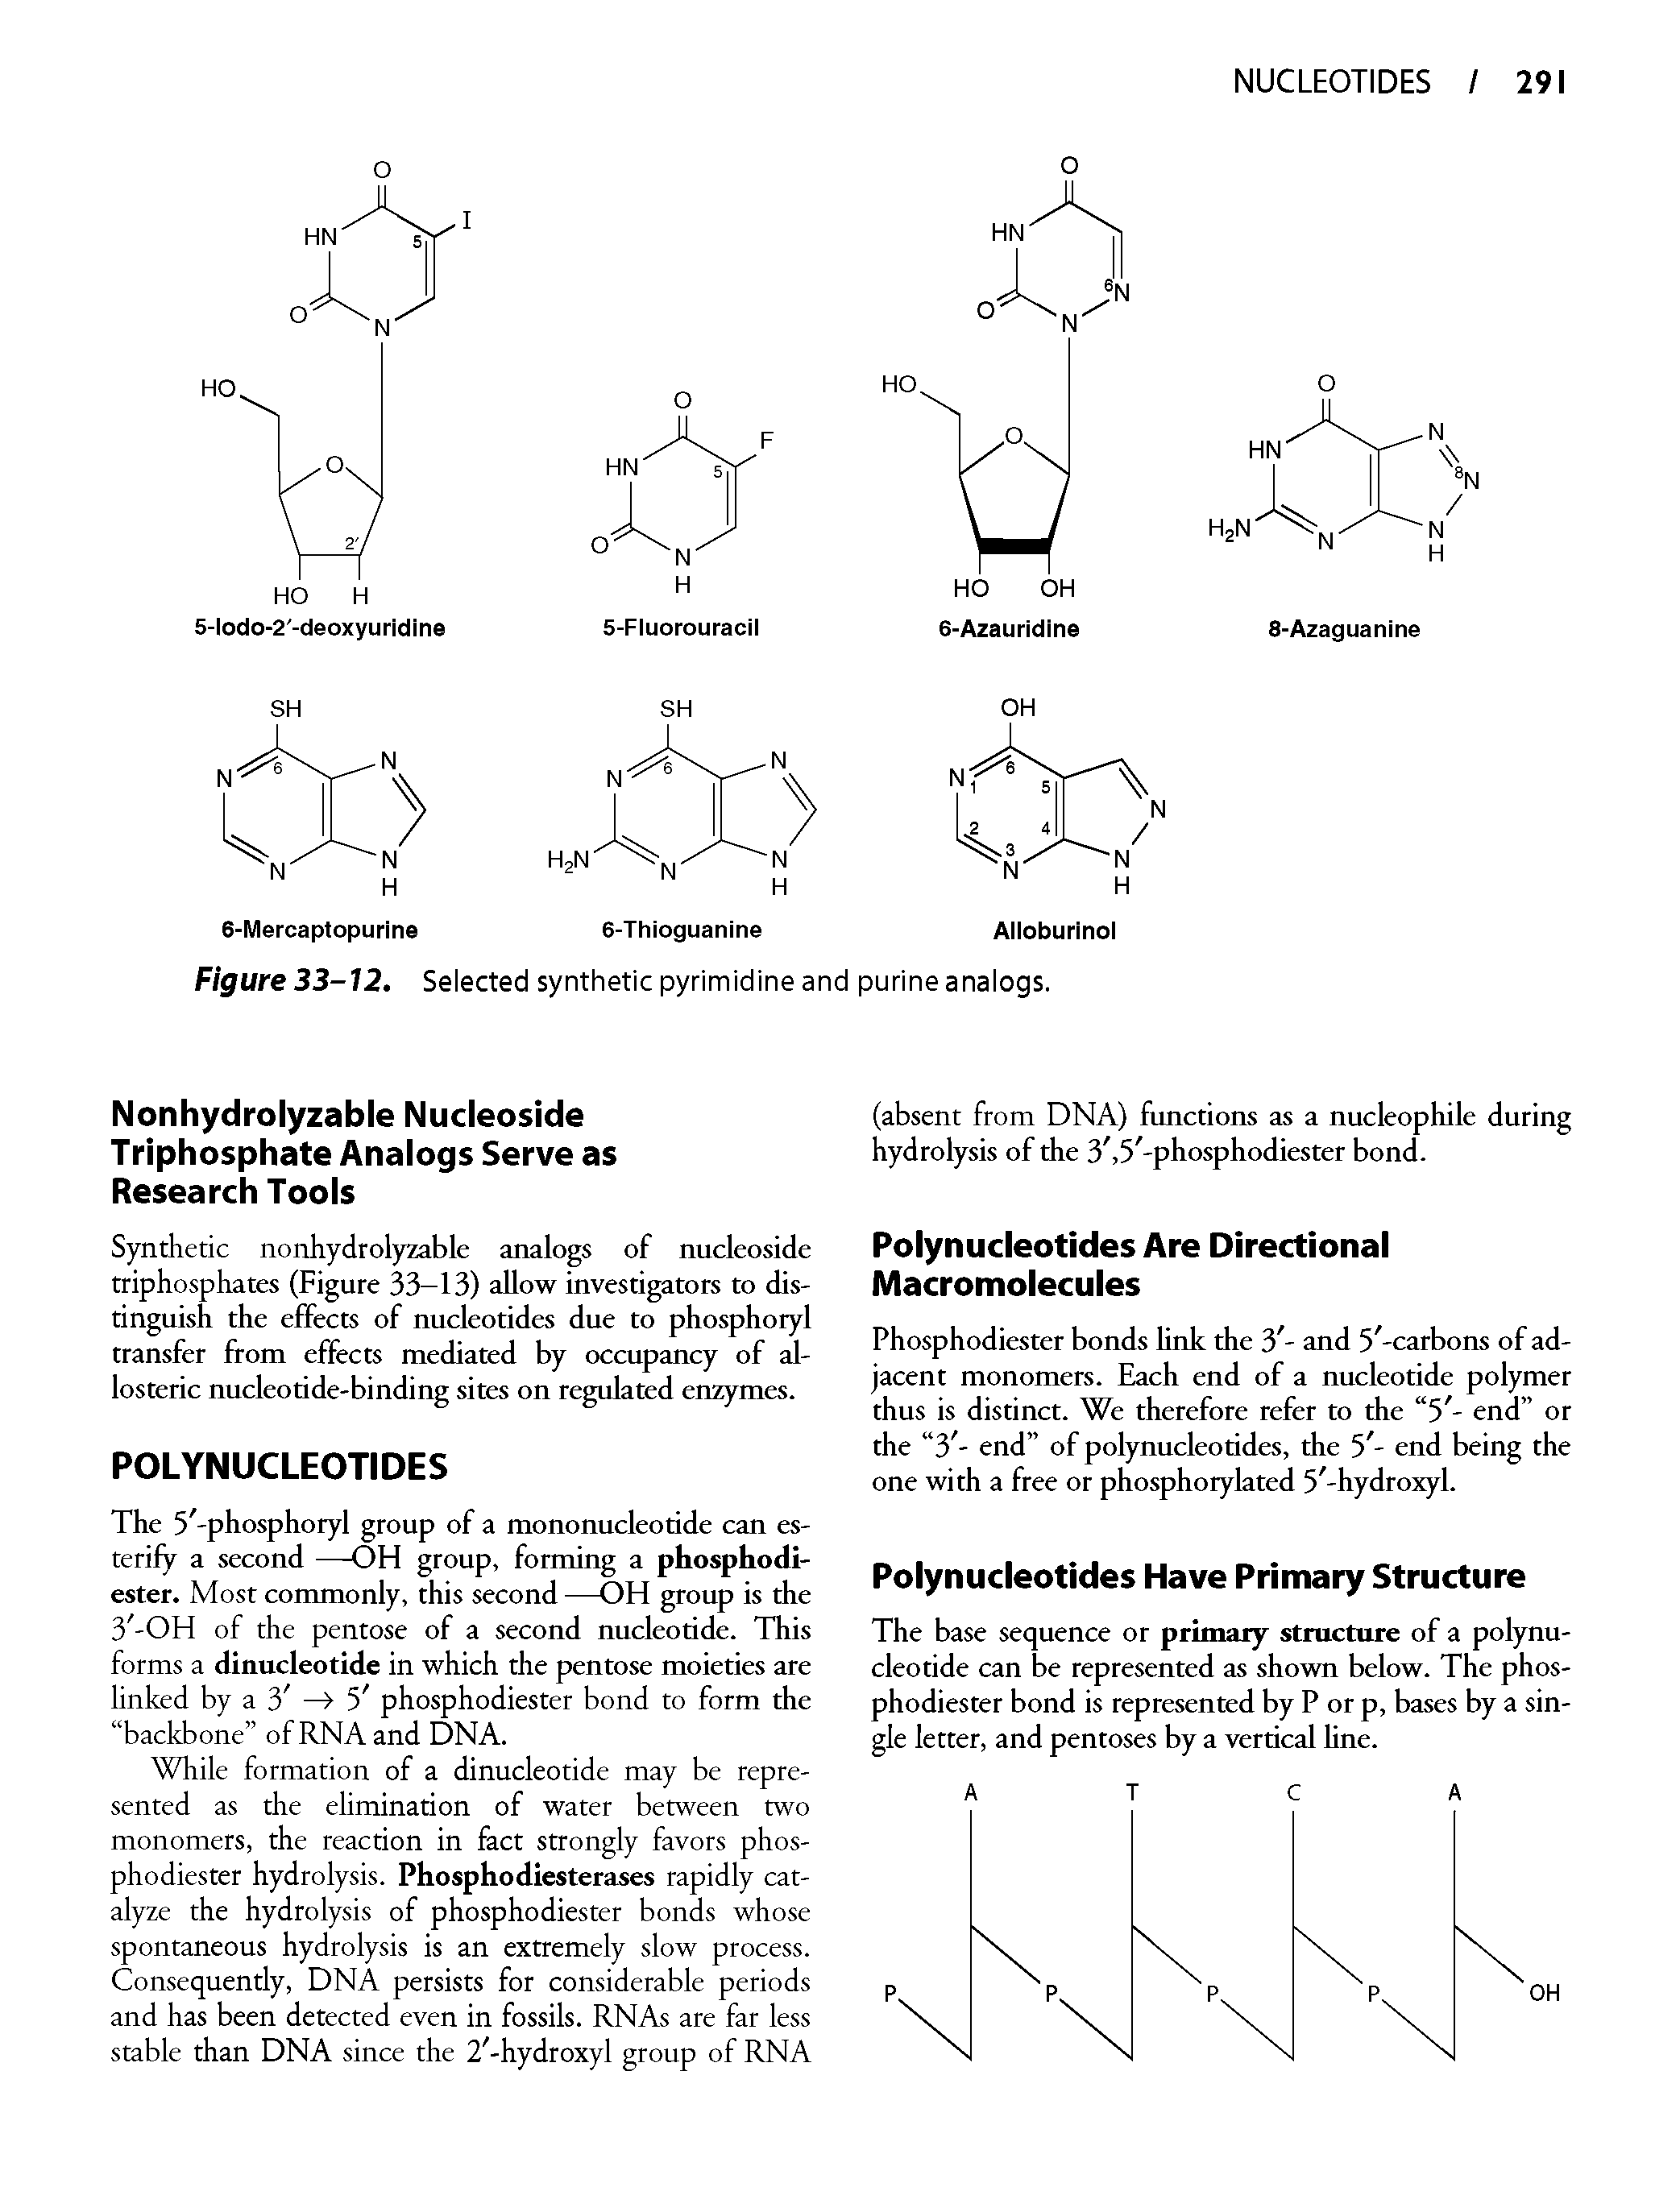 Figure 33-12. Selected synthetic pyrimidine and purine analogs.